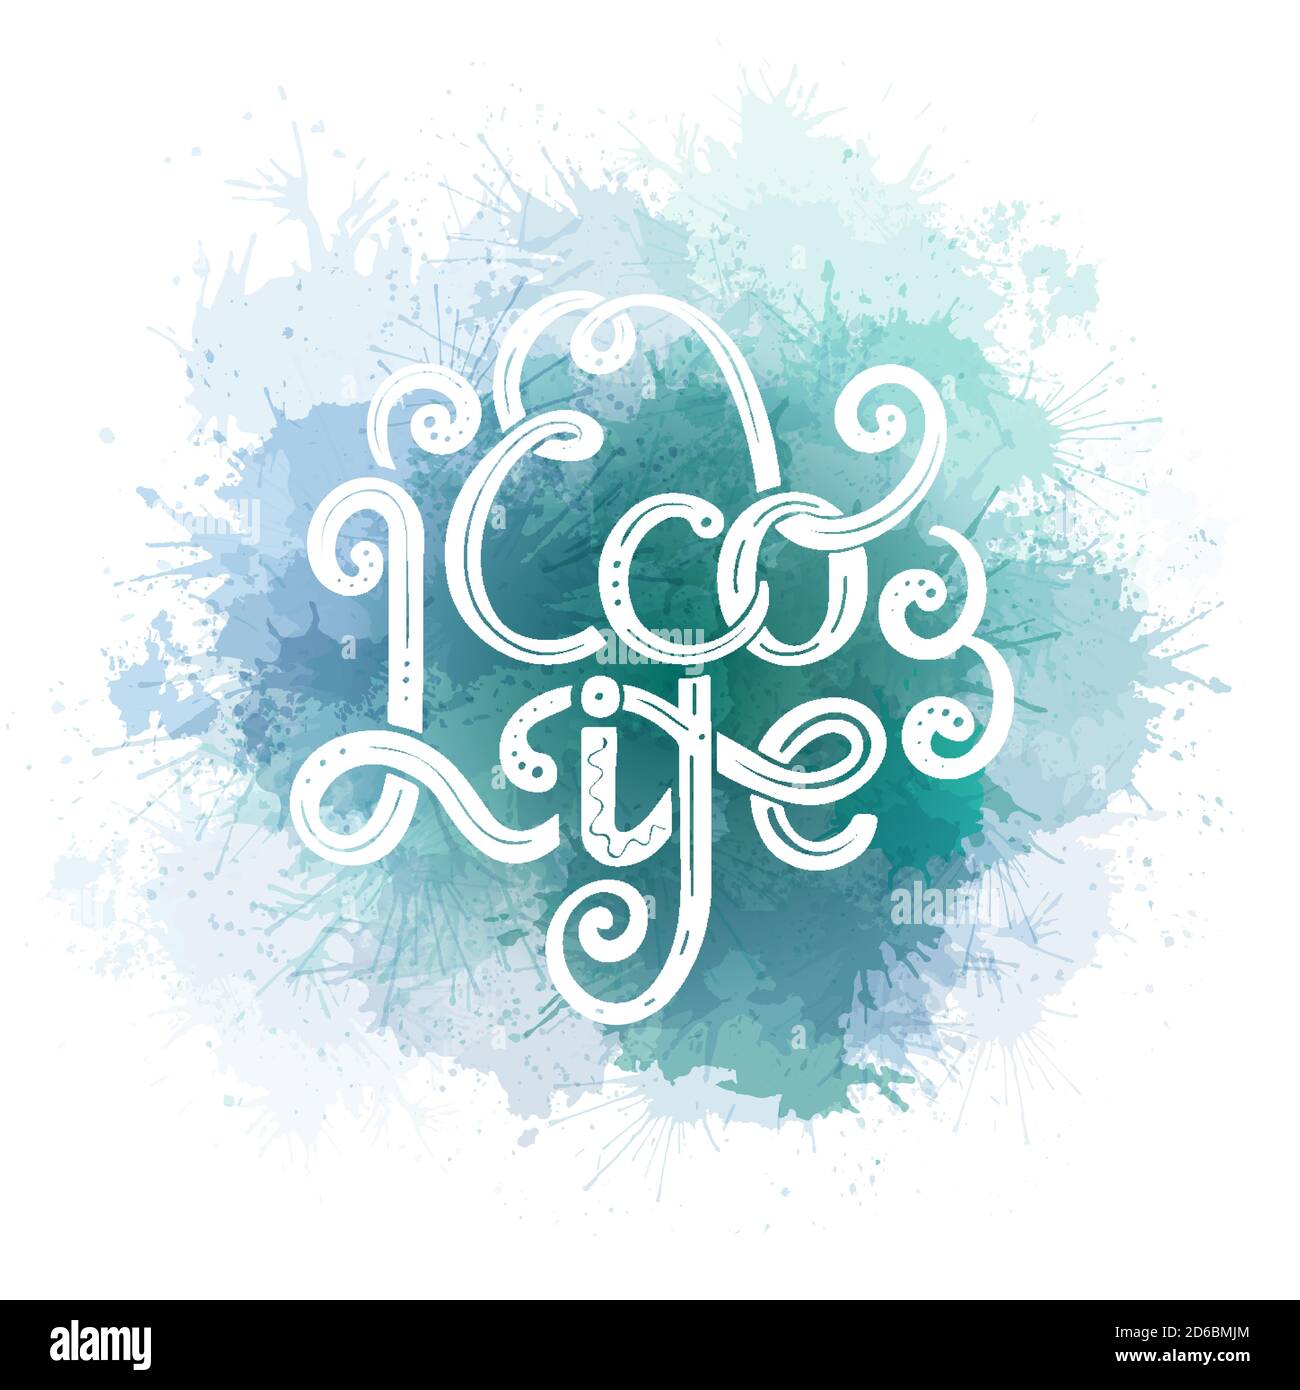 Eco life. Ink lettering with curls and decorations. Stylish quote for modern life. Eco friendly calligraphy with blue watercolor splashes for cards, s Stock Vector